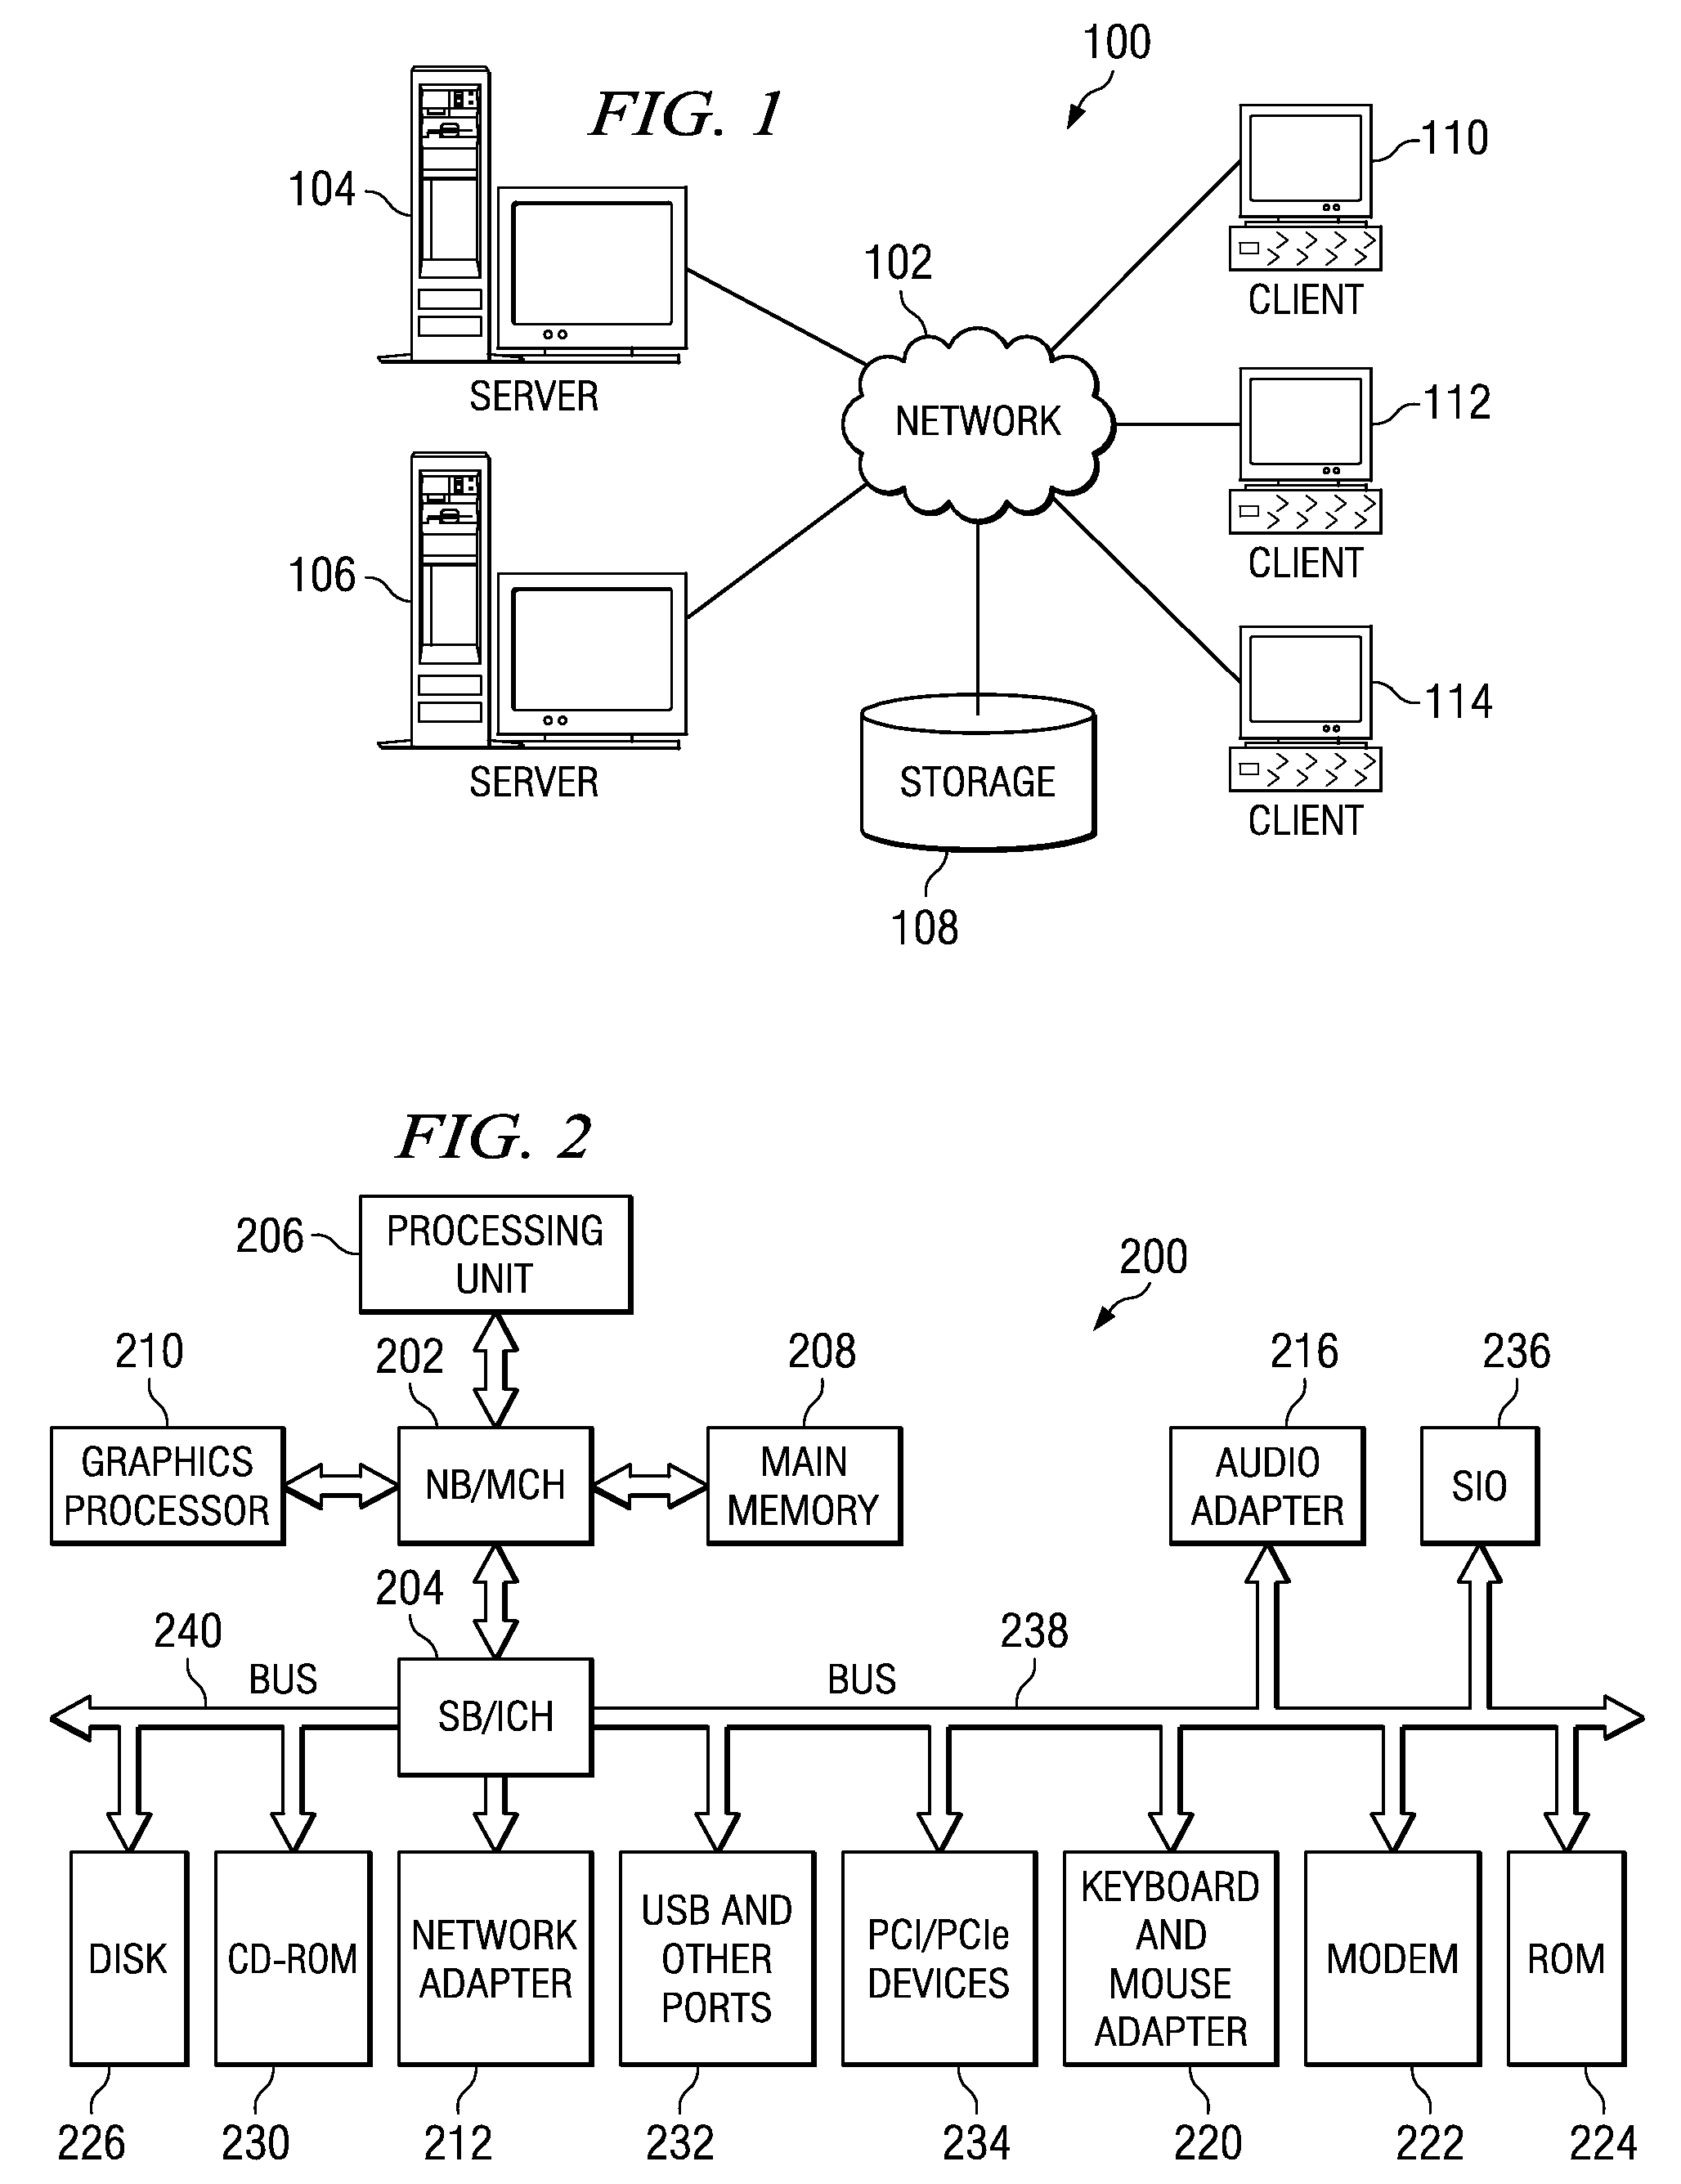 Method for Data Processing Using a Multi-Tiered Full-Graph Interconnect Architecture